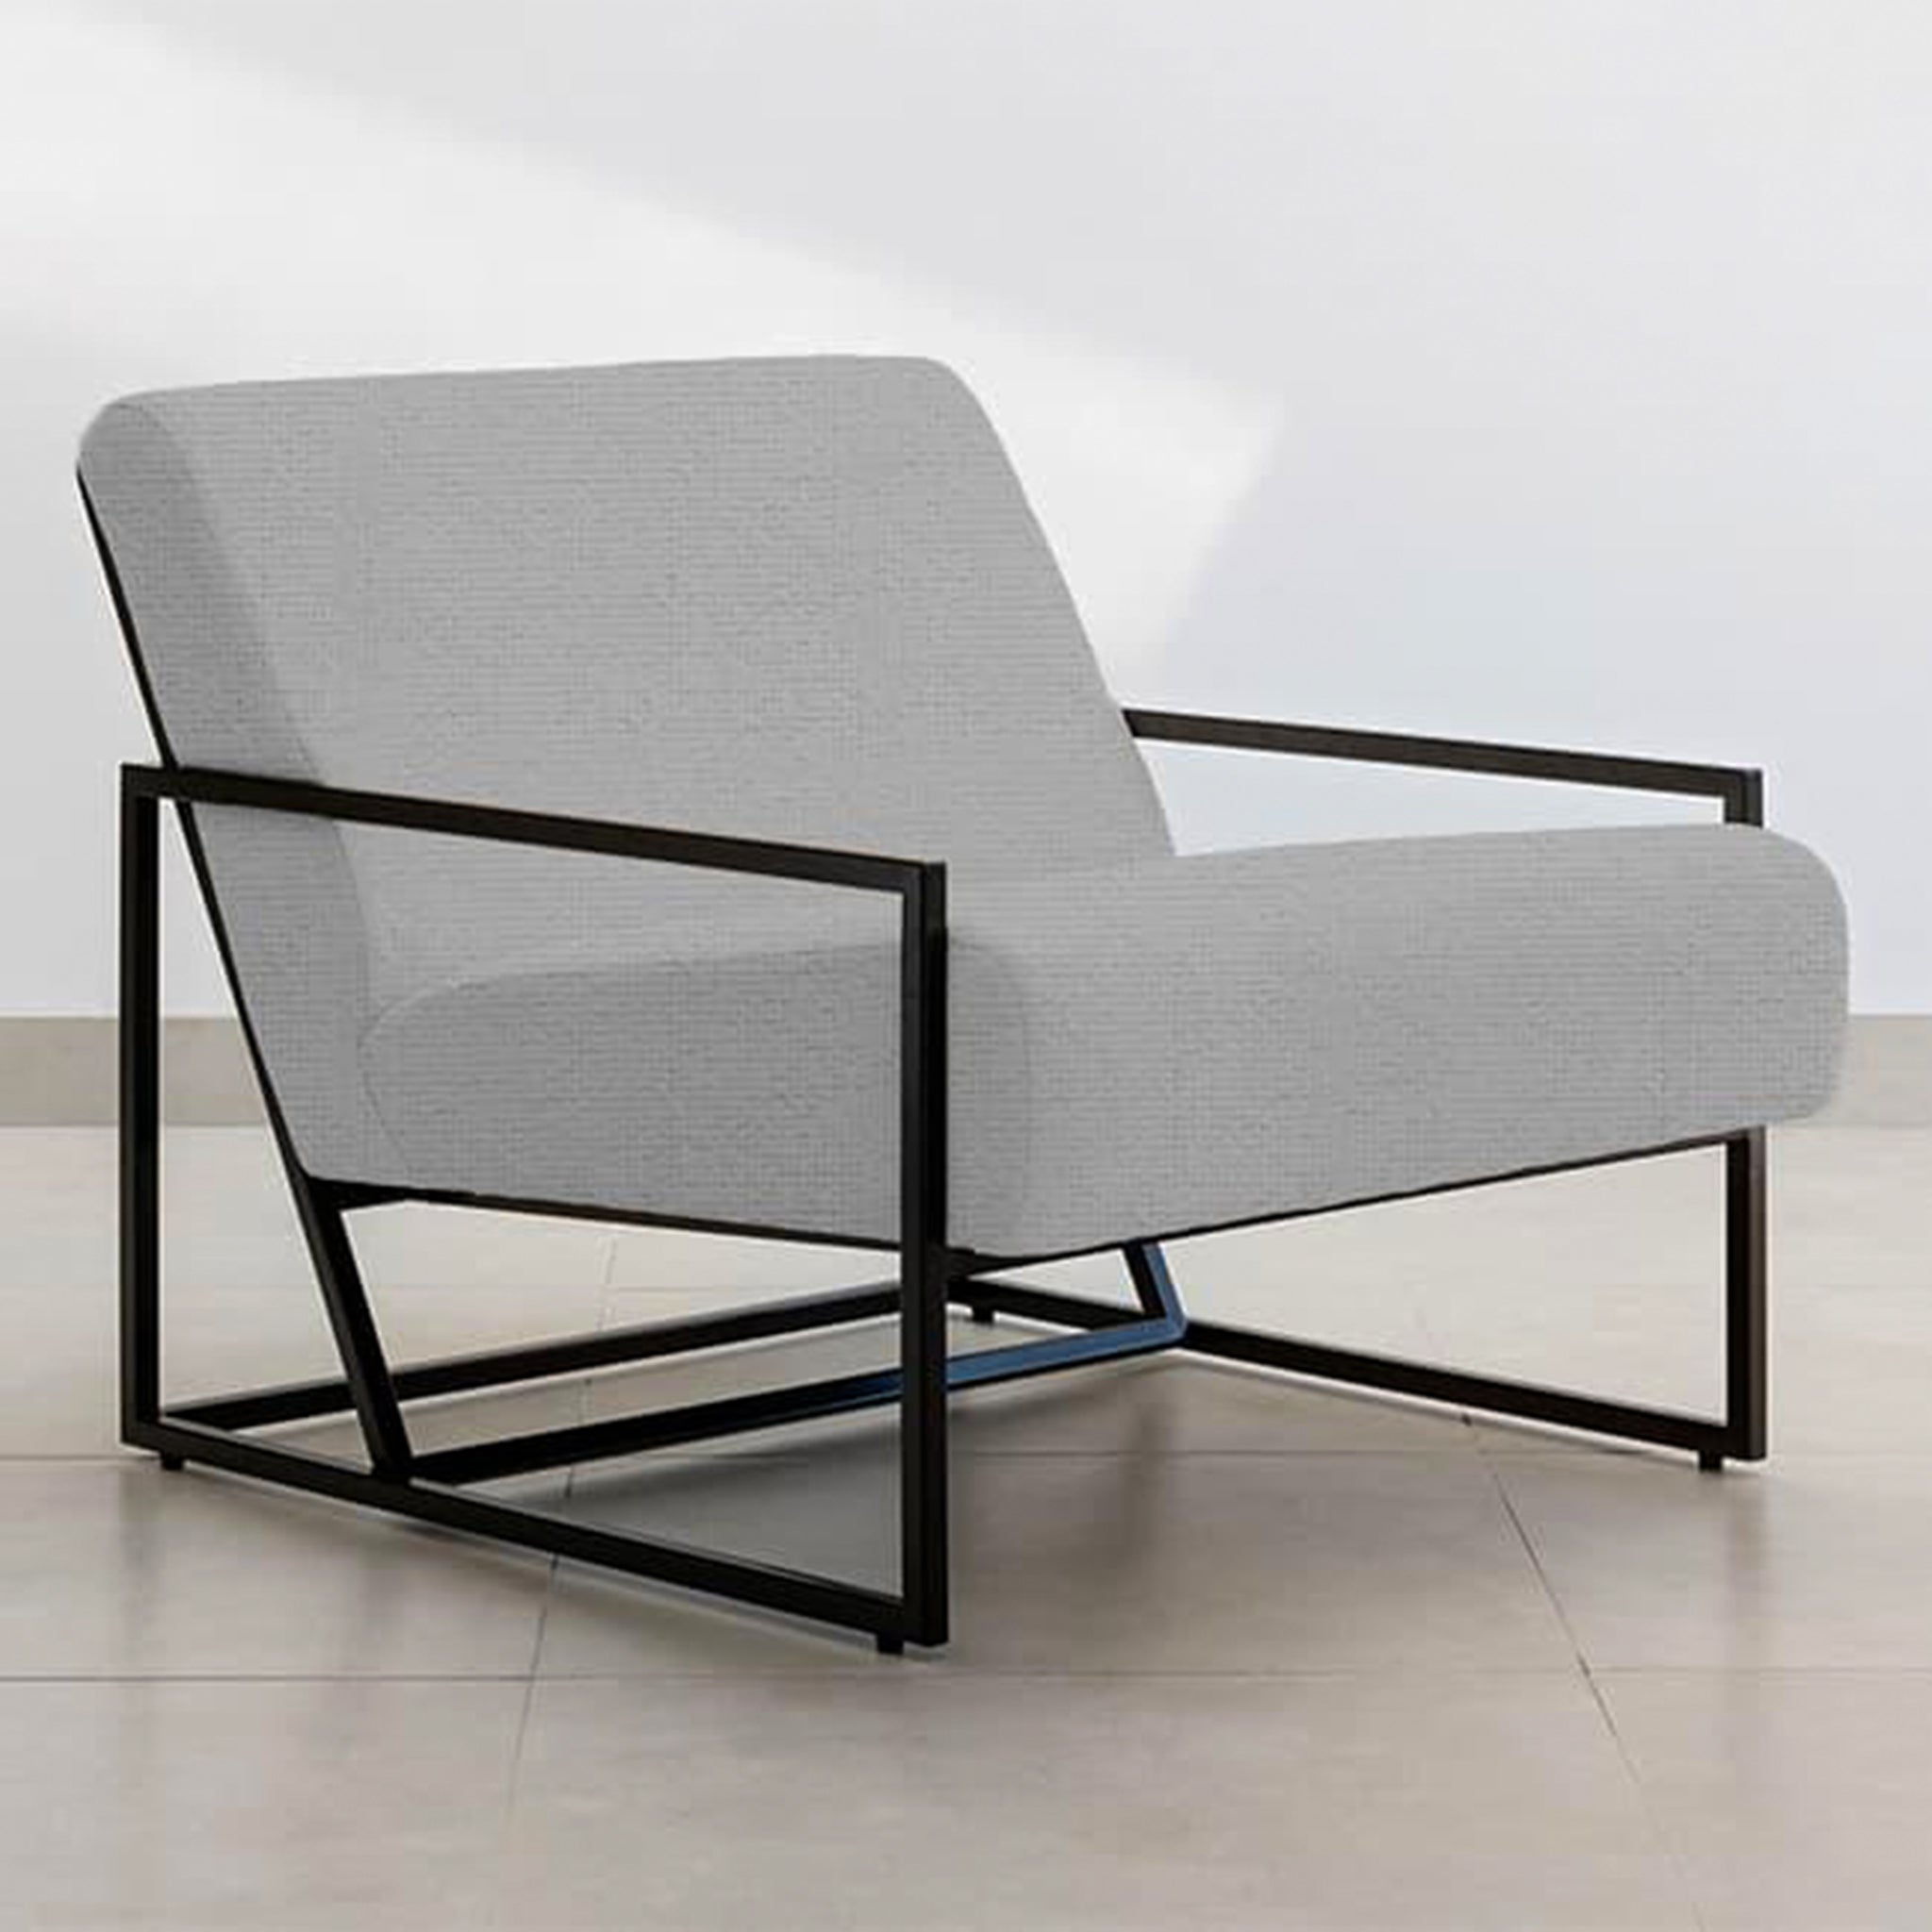 Top view of The Daphne Accent Chair, emphasizing its deep seating and sleek metal frame.